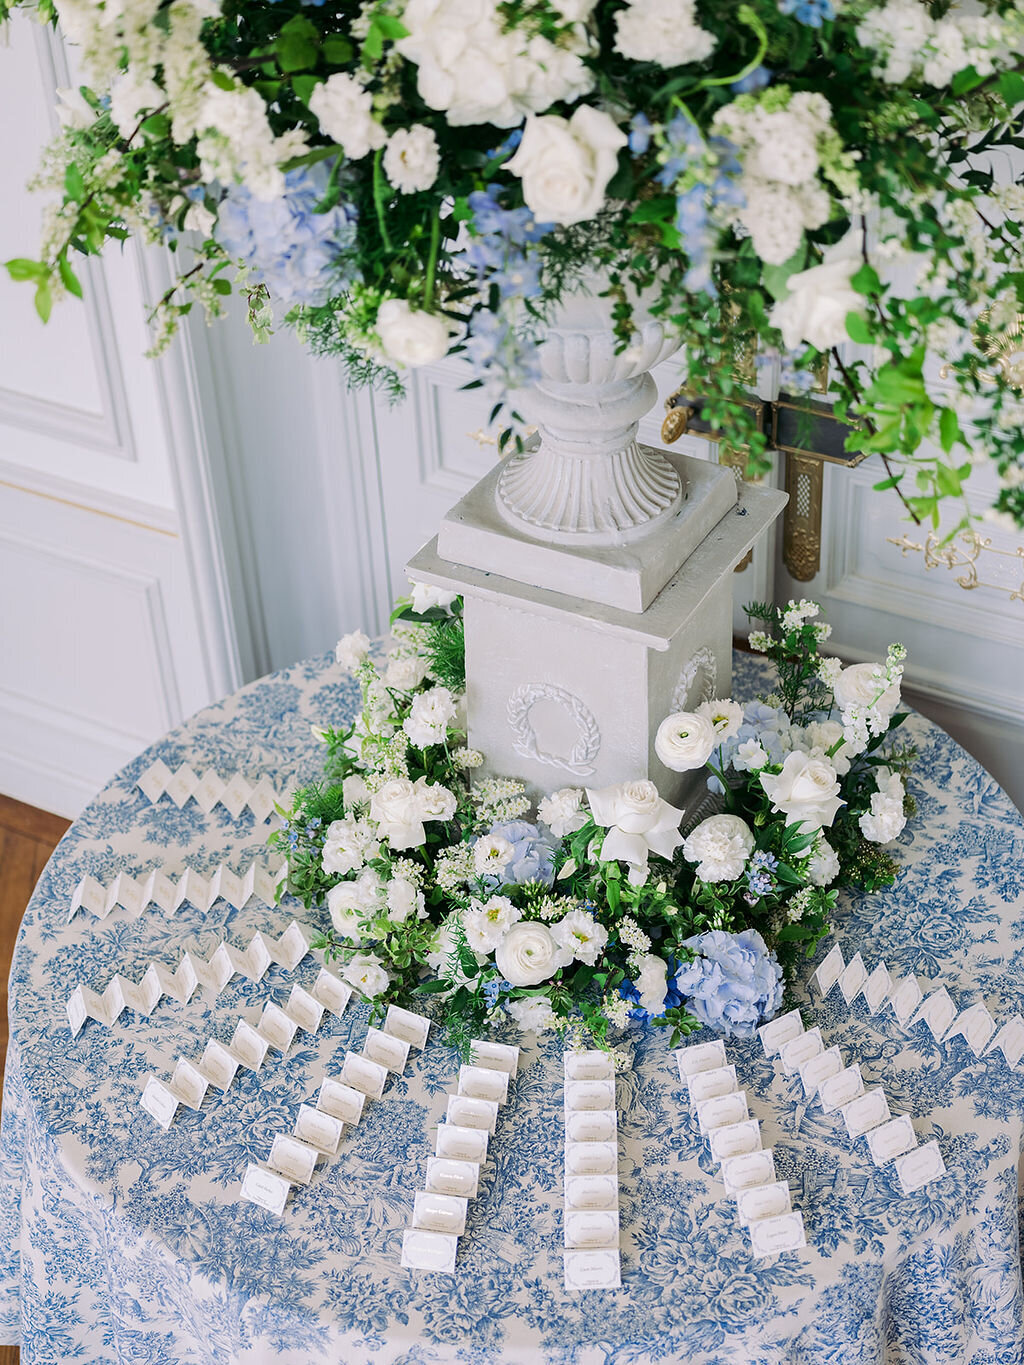 Escort cards table in shades of blue